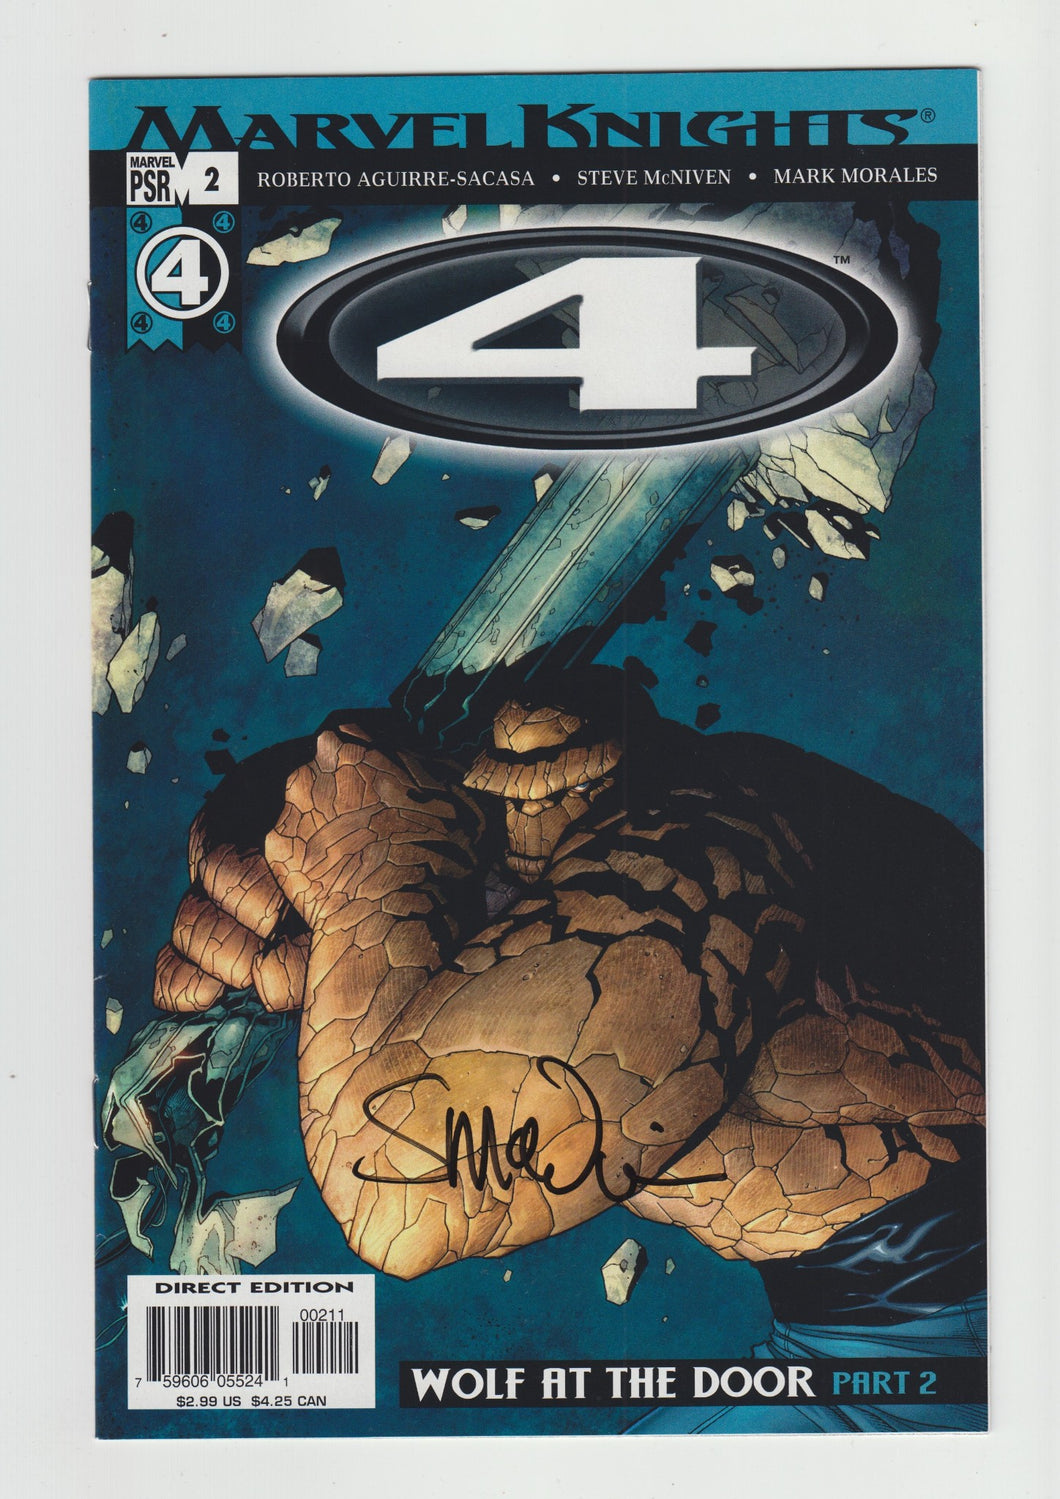 4 (2004 Marvel Knights) #2A Signed by Artist Steve McNiven